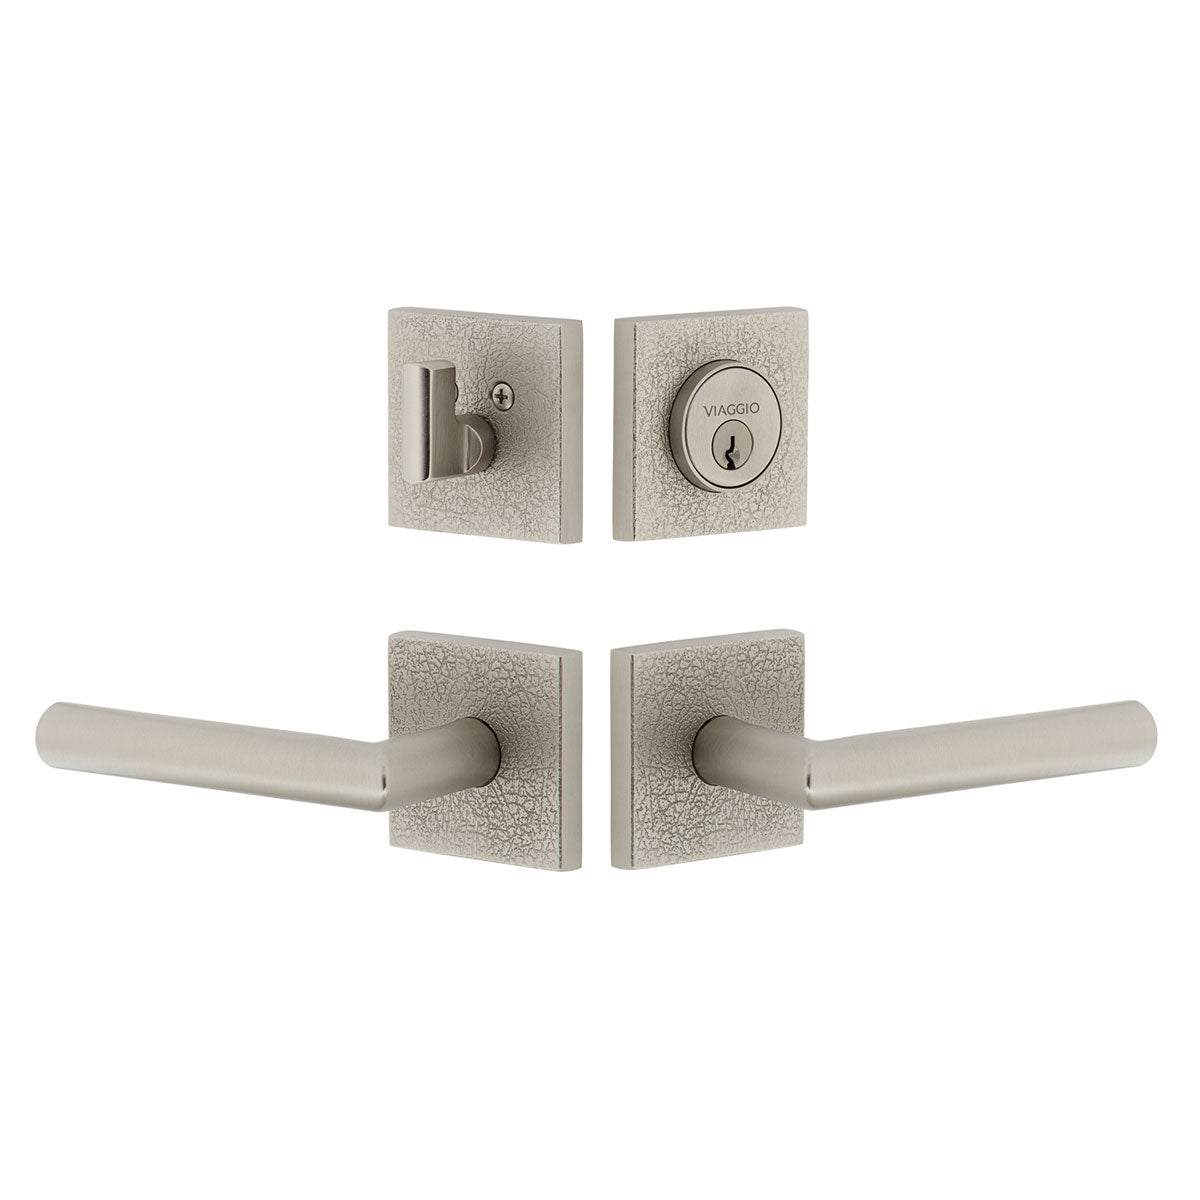 Quadrato Leather Rosette Entry Set with Moderno Lever in Satin Nickel